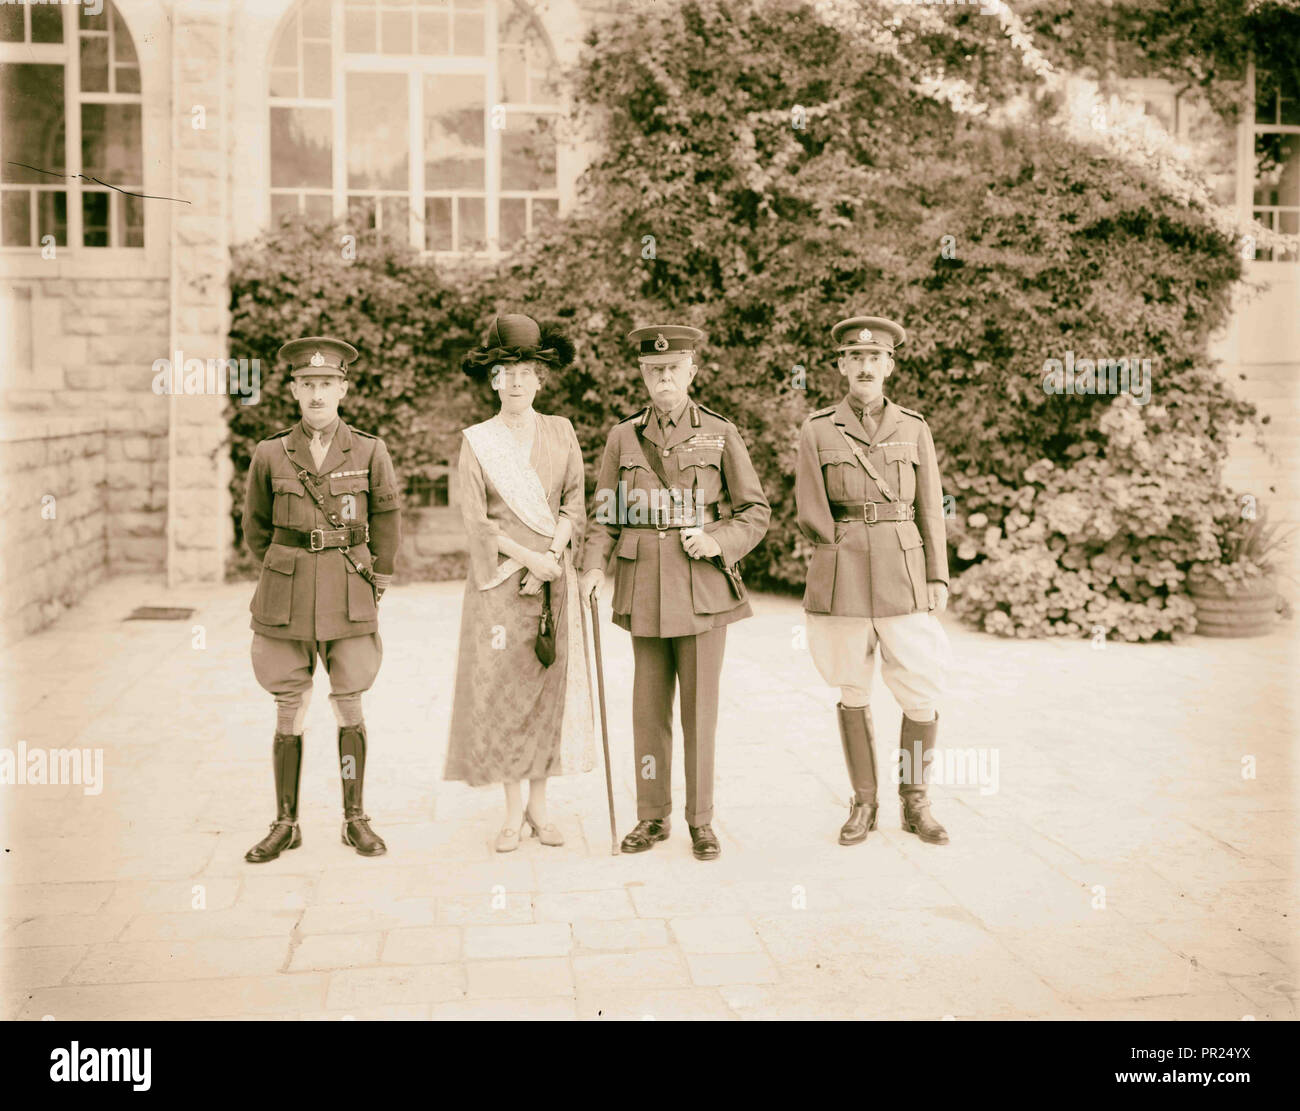 Lord & Lady Plumer, flanked by 2 officers. 1925, Jerusalem, Israel Stock Photo